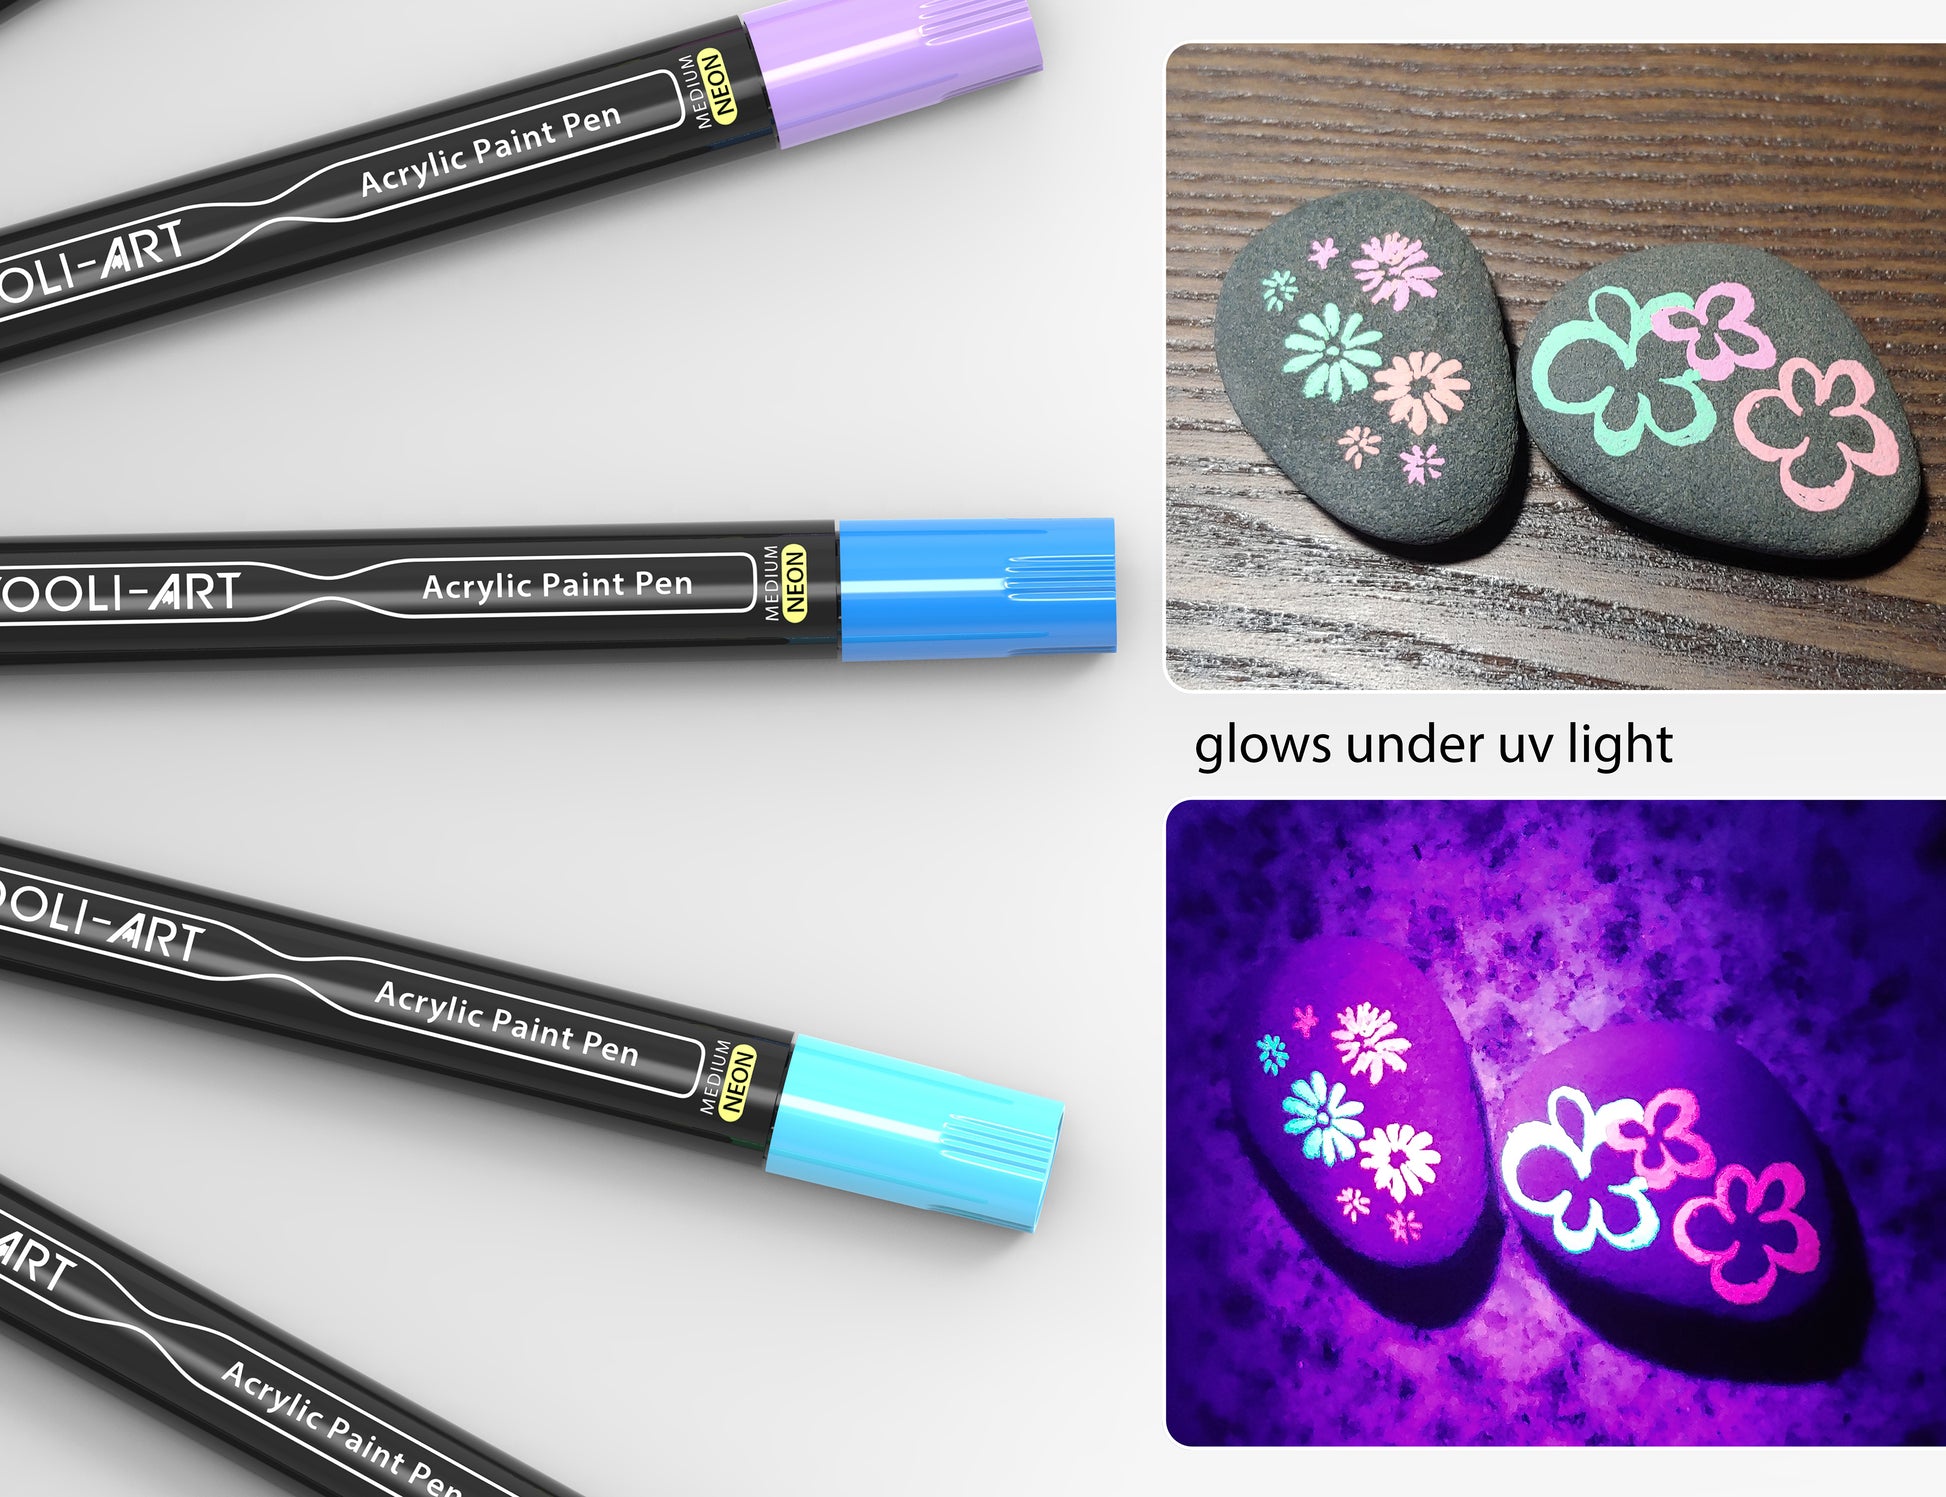 Tooli-Art Neon Fluorescent Acrylic Paint Pens Marker for Rocks, Glass,  Mugs, and Most Surfaces with 0.7mm Extra Fine and 3.0mm Medium Tip Marker  Set of 24 